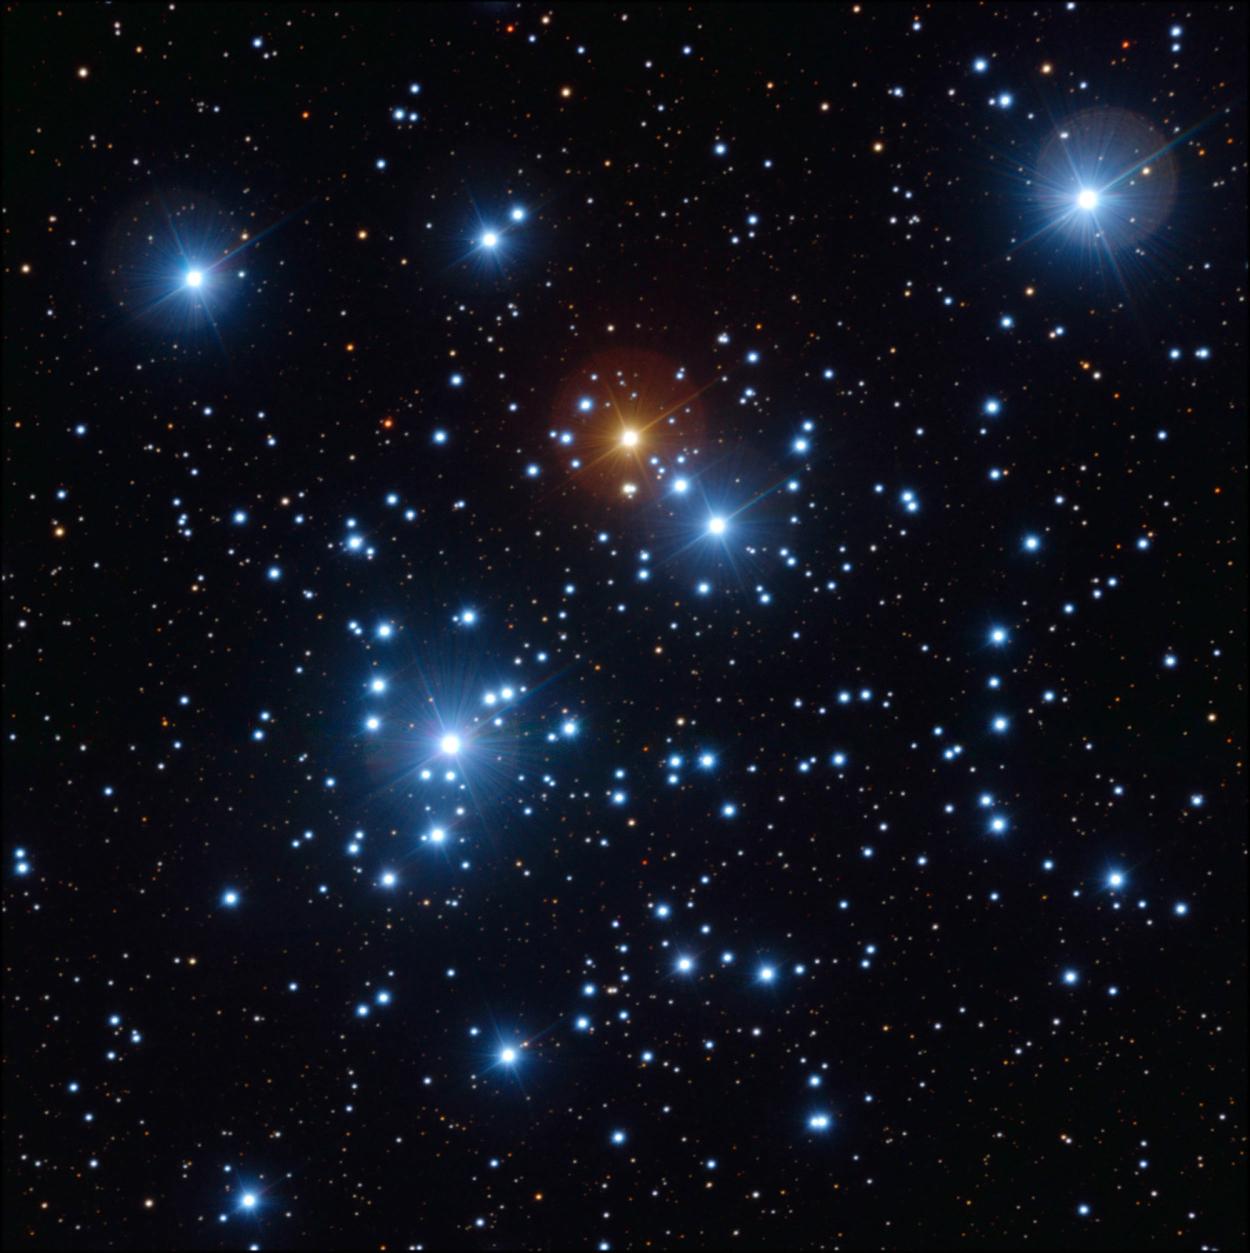 Colour image of a group of stars. There are several very bright blue stars, and one very bright red star.